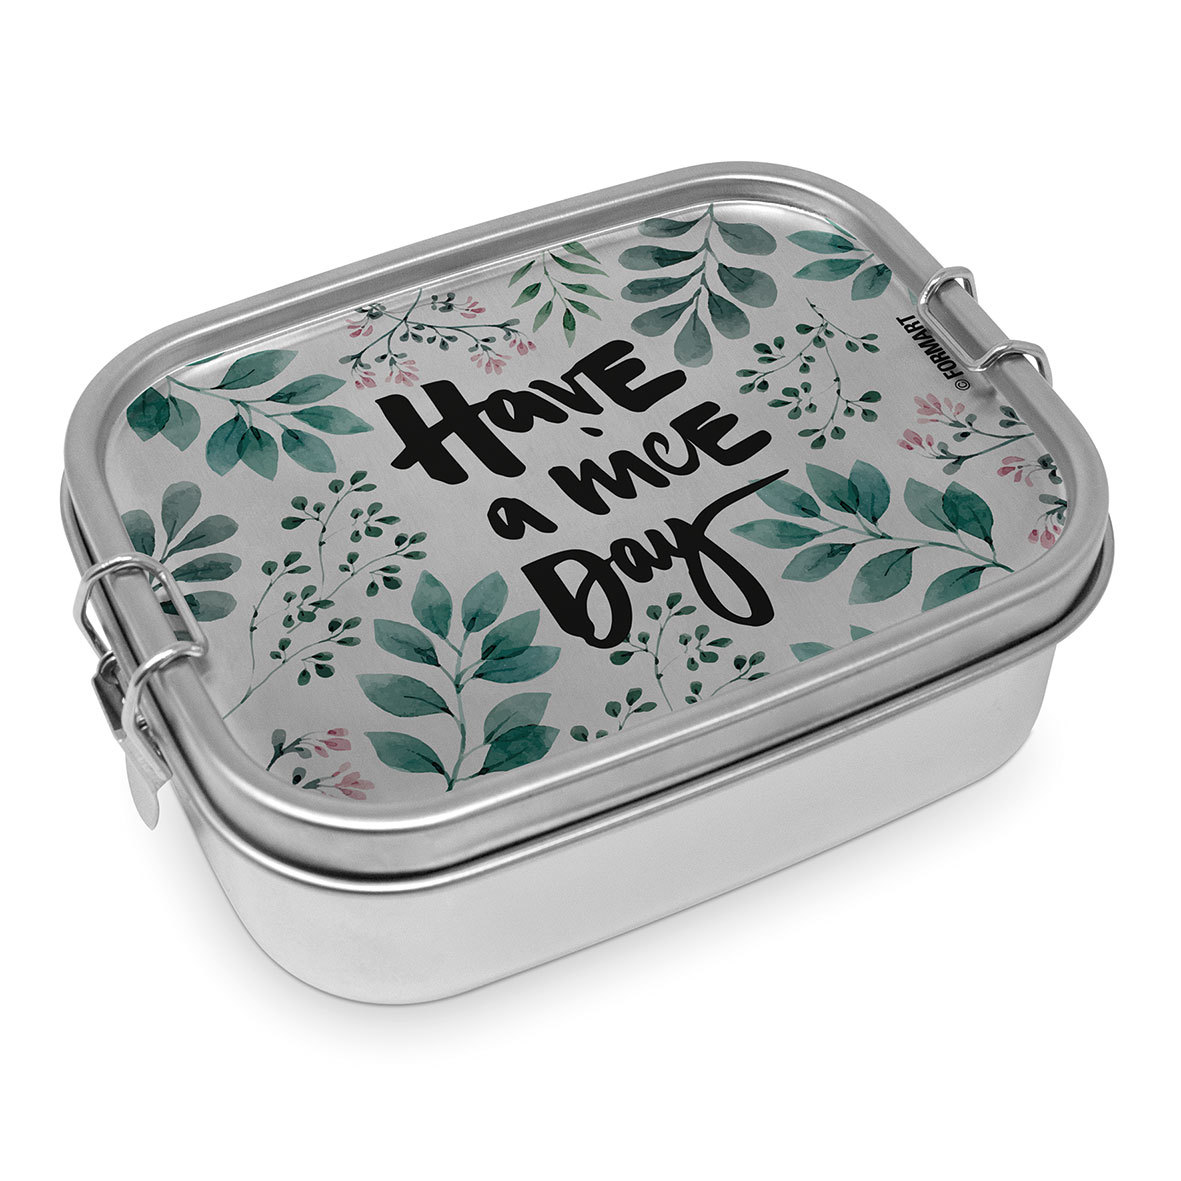 Have a nice day Steel Lunch Box